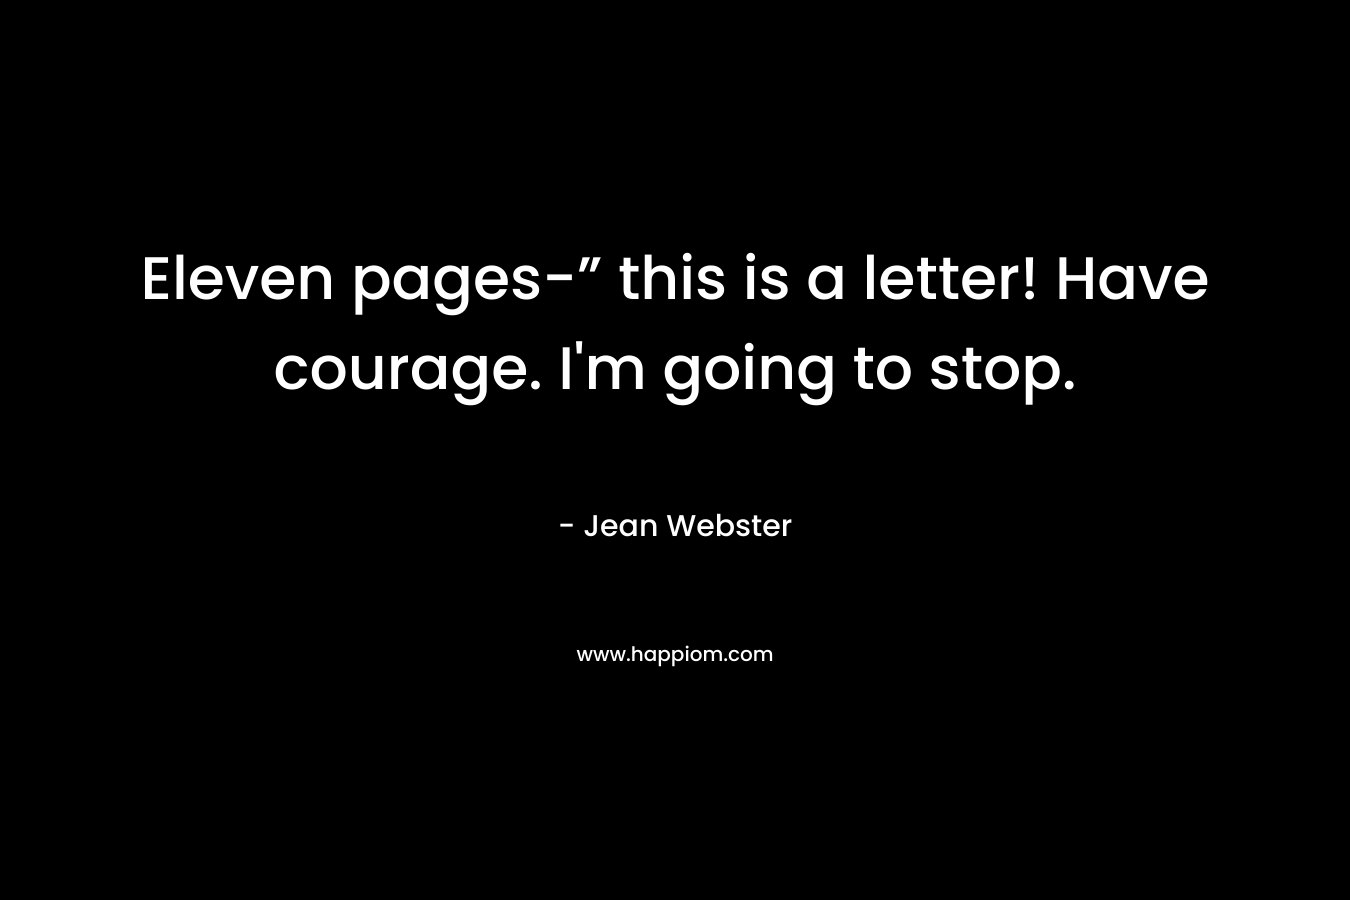 Eleven pages-” this is a letter! Have courage. I’m going to stop. – Jean Webster